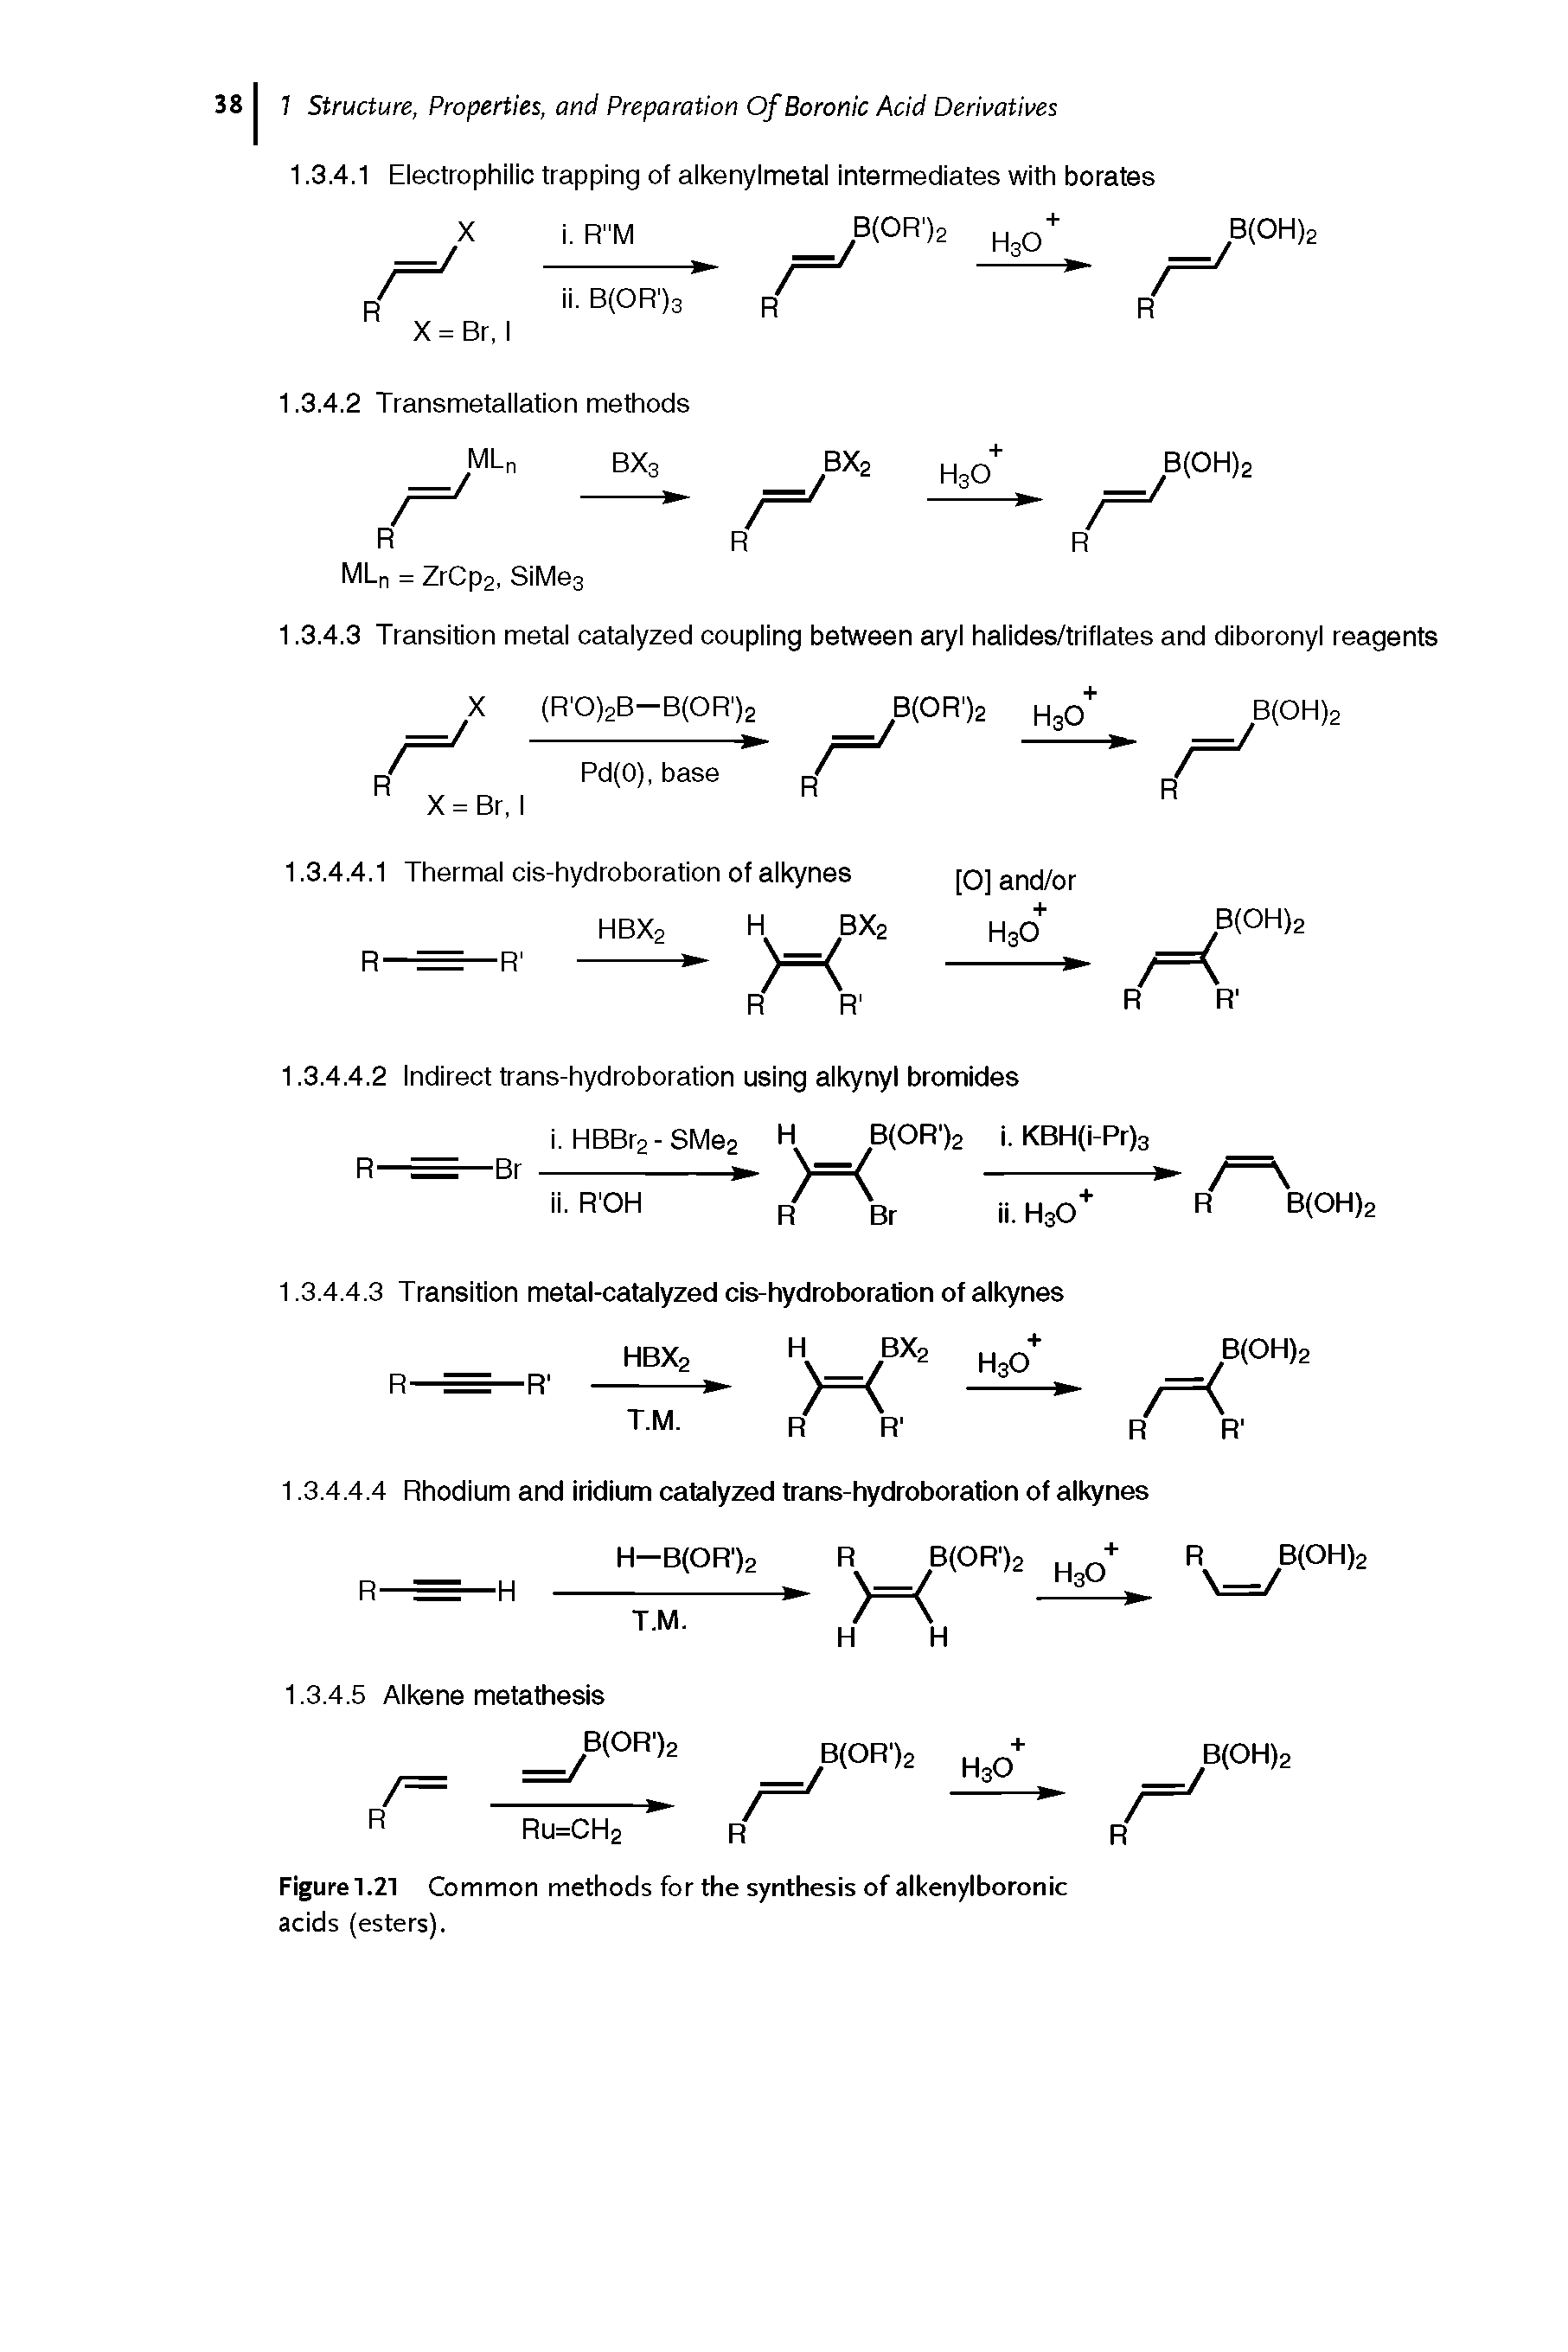 Figure1.21 Common methods for the synthesis of alkenylboronic acids (esters).